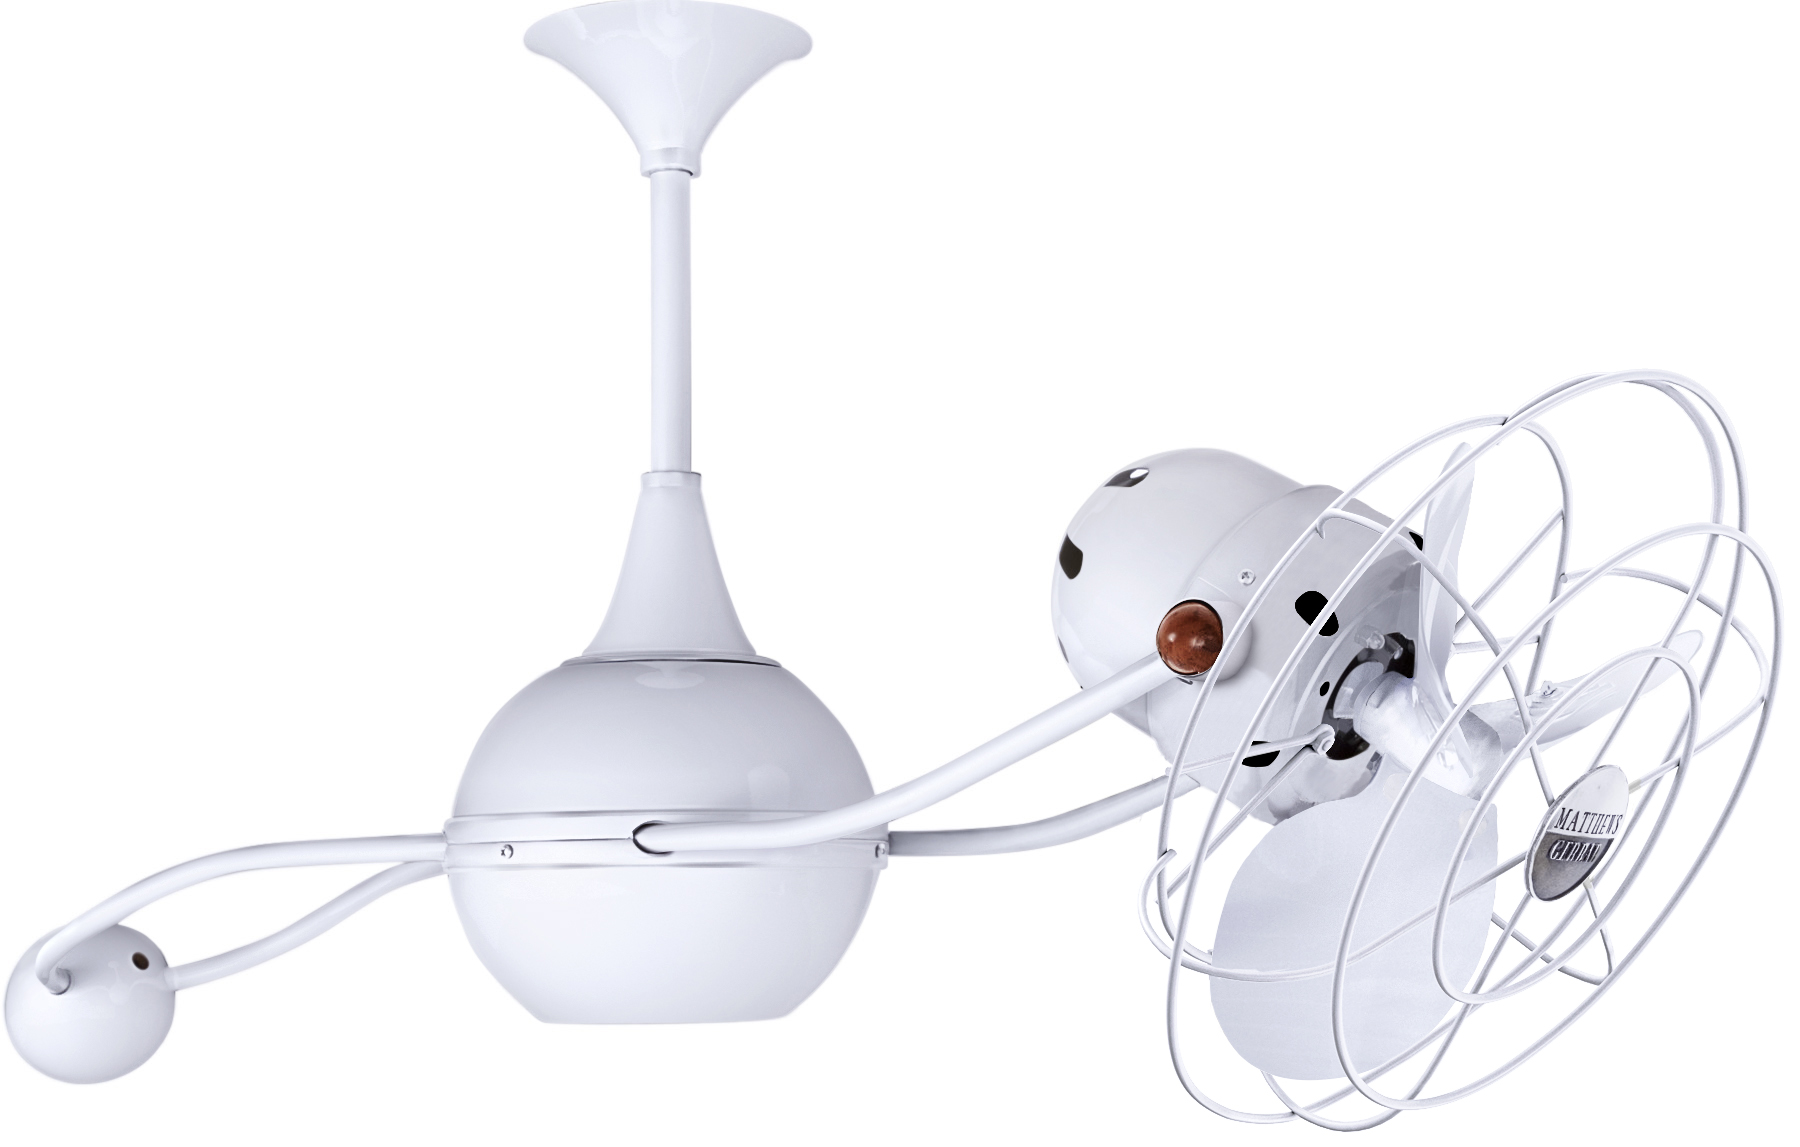 Brisa 2000 ceiling fan in gloss white finish with metal blades in decorative cage made by Matthews Fan Company.